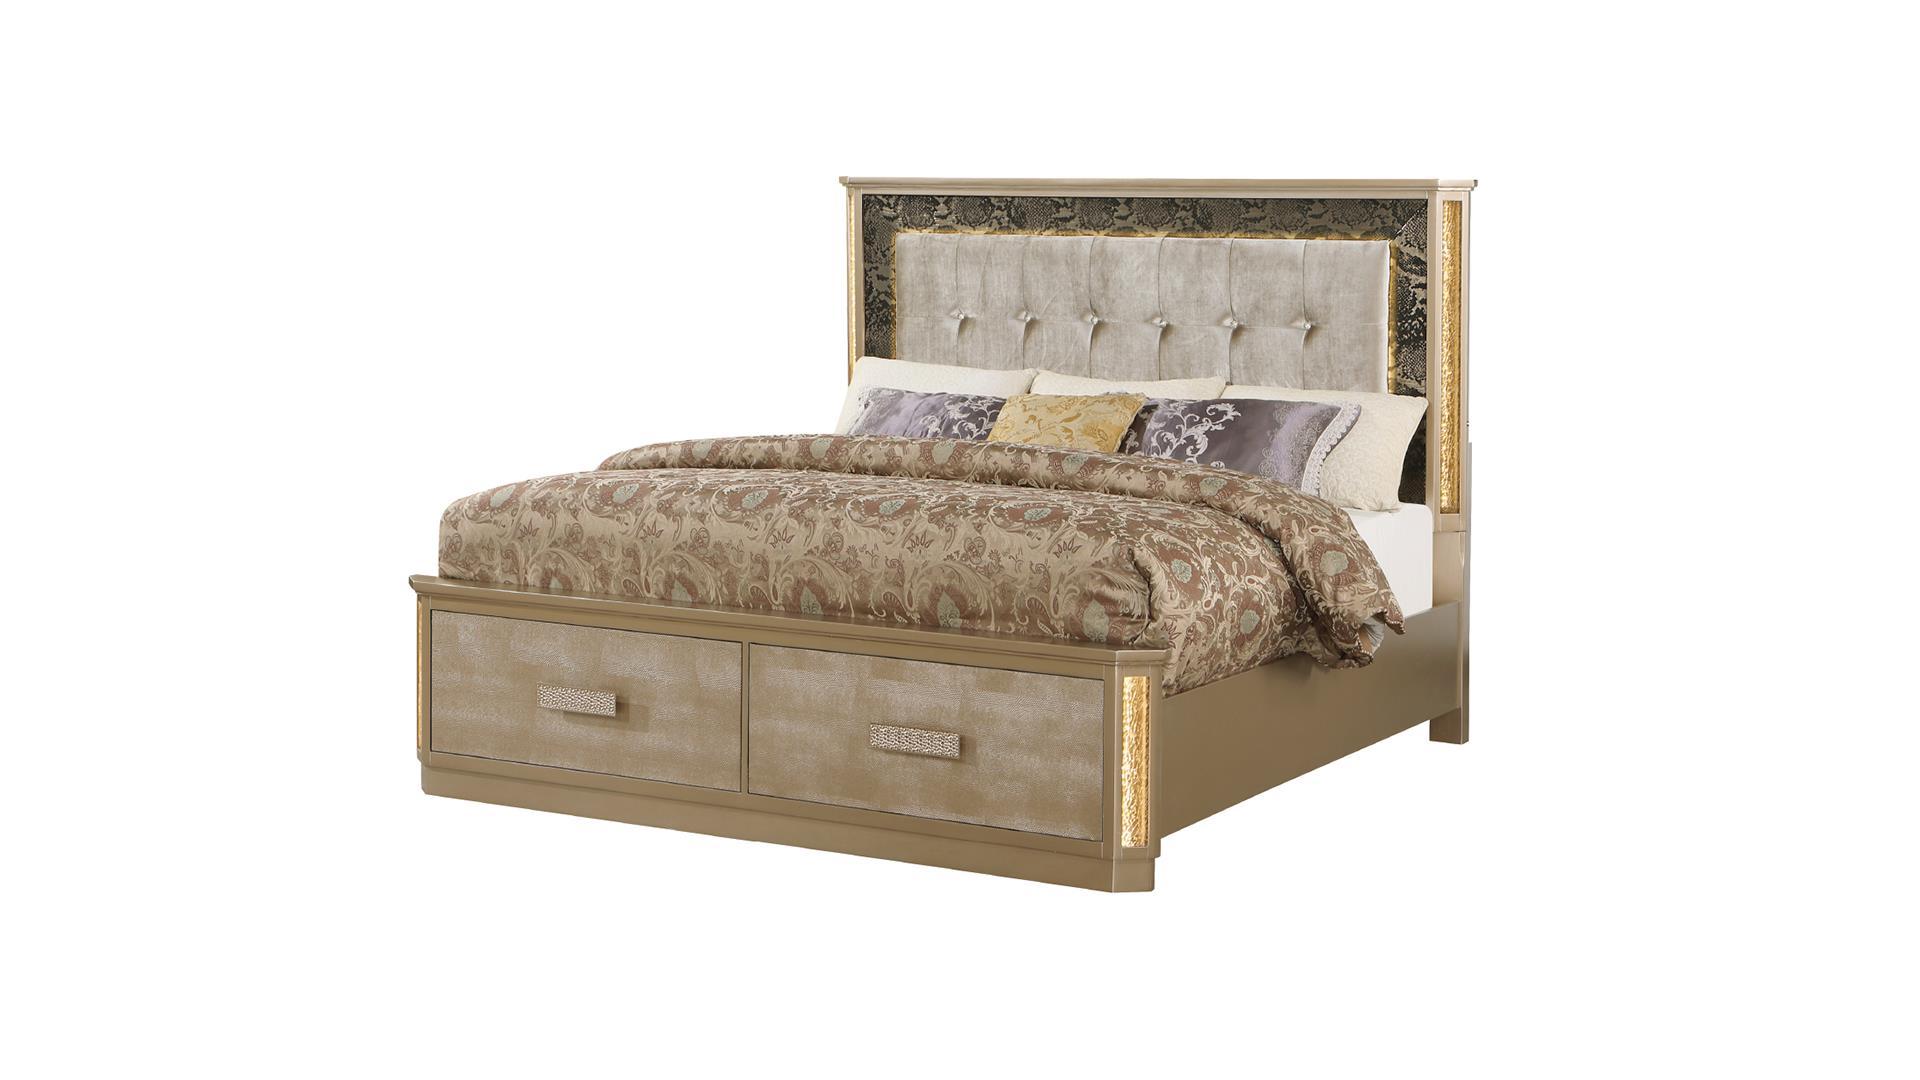 Contemporary, Modern Storage Bed MEDUSA 601955551601 in Gold Faux Leather